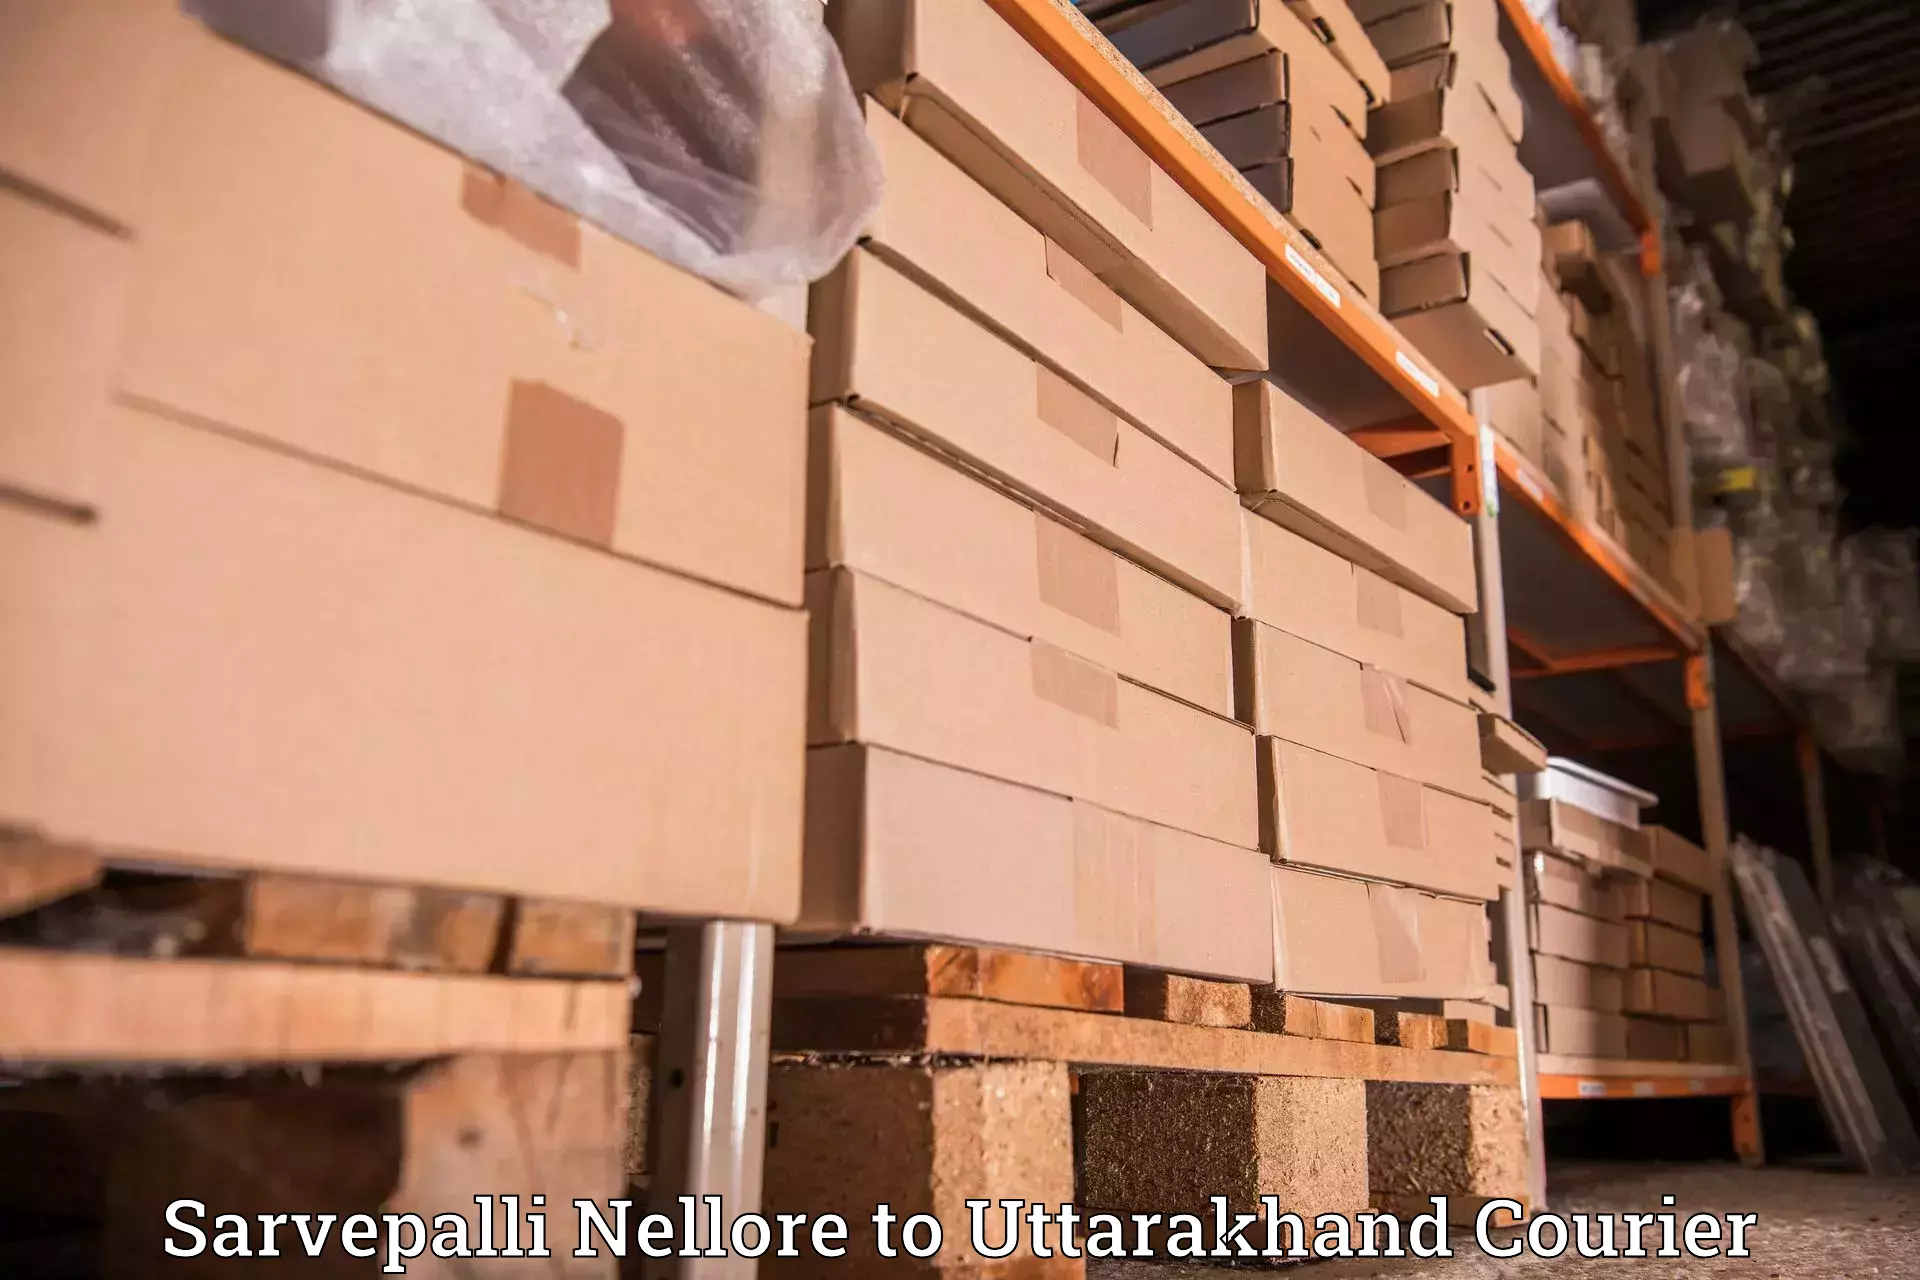 Automated shipping processes Sarvepalli Nellore to Bhagwanpur